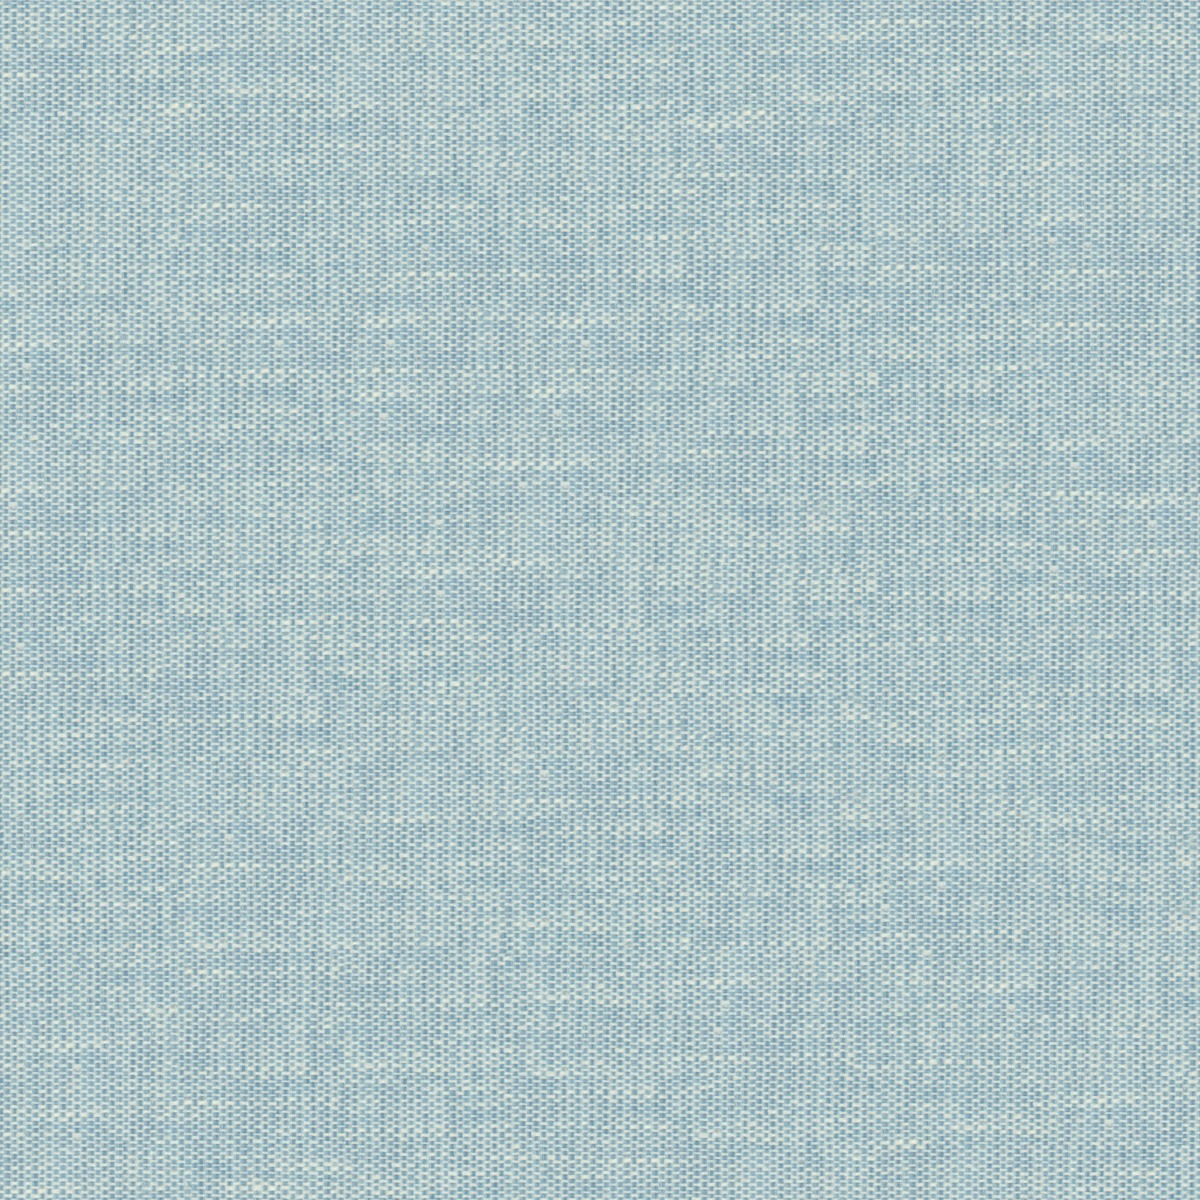 A seamless fabric texture with plain blue flat units arranged in a None pattern